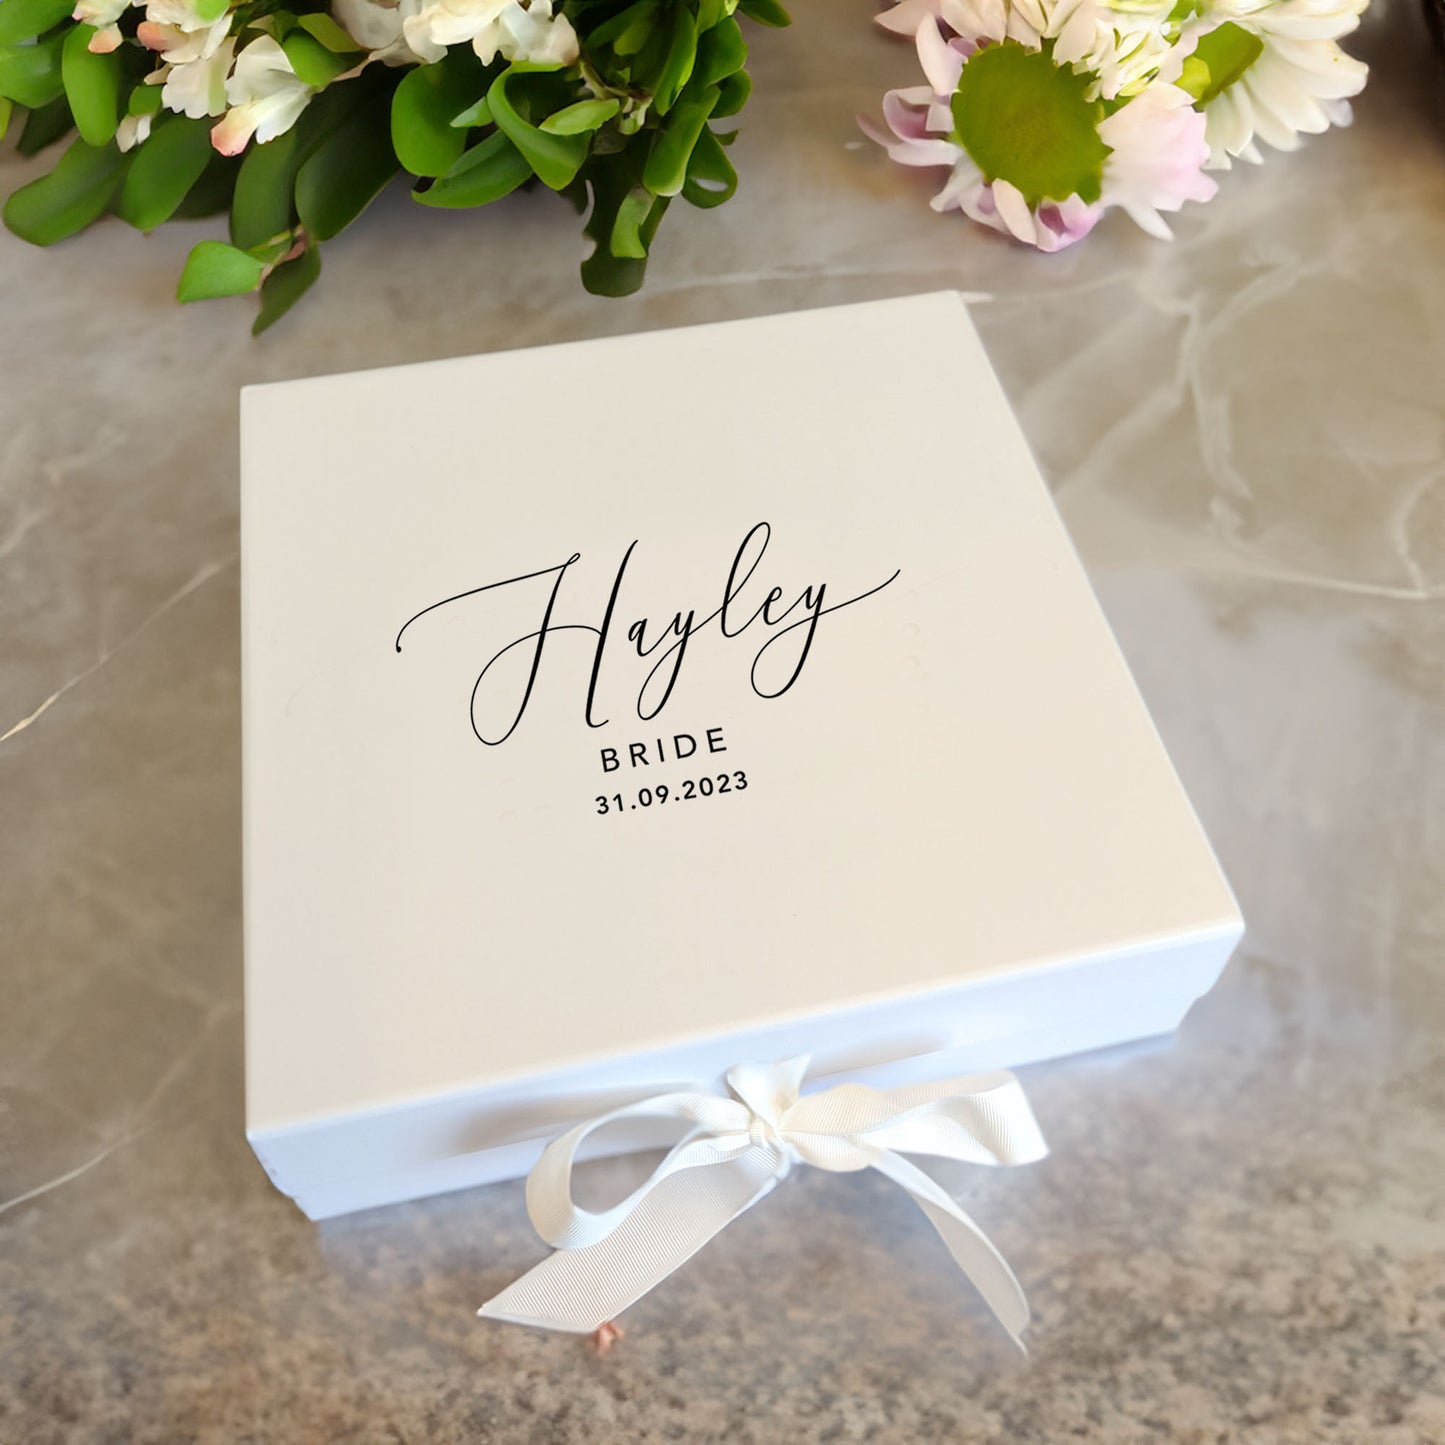 Large Personalised Wedding Gift Box for Bride or Groom - White, Navy & Black